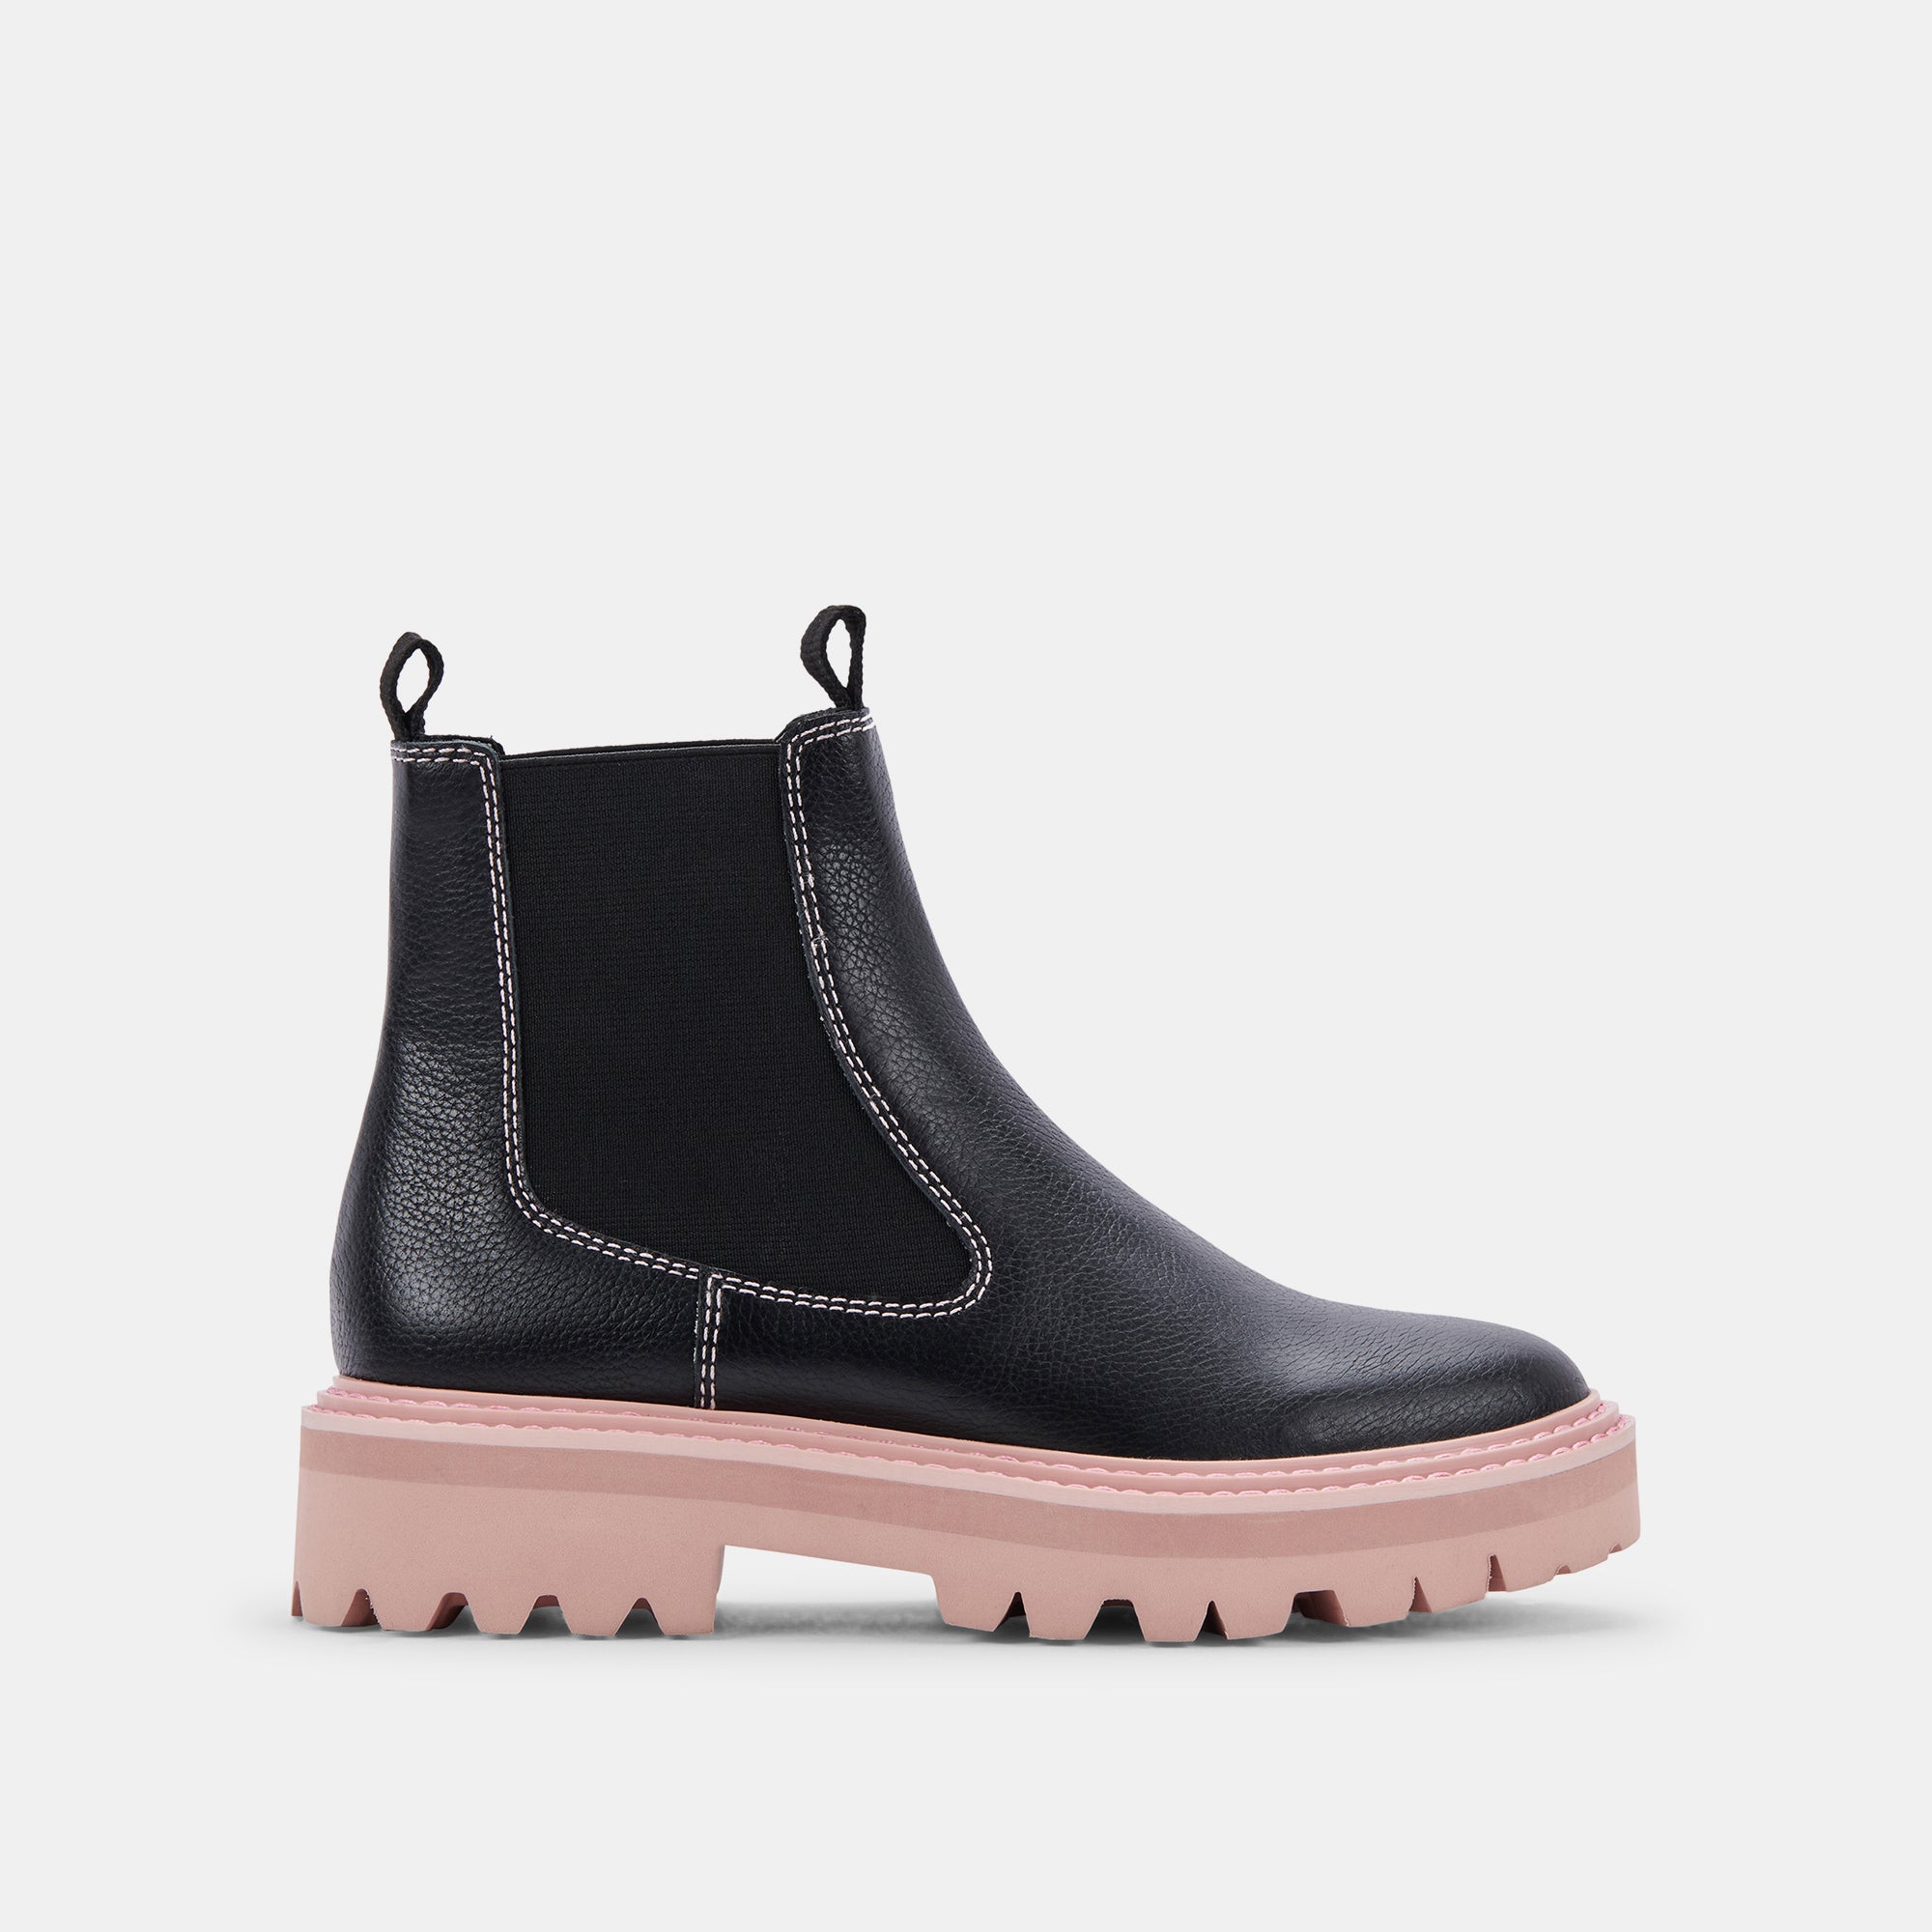 Moana H2o Boots Black Pink Leather